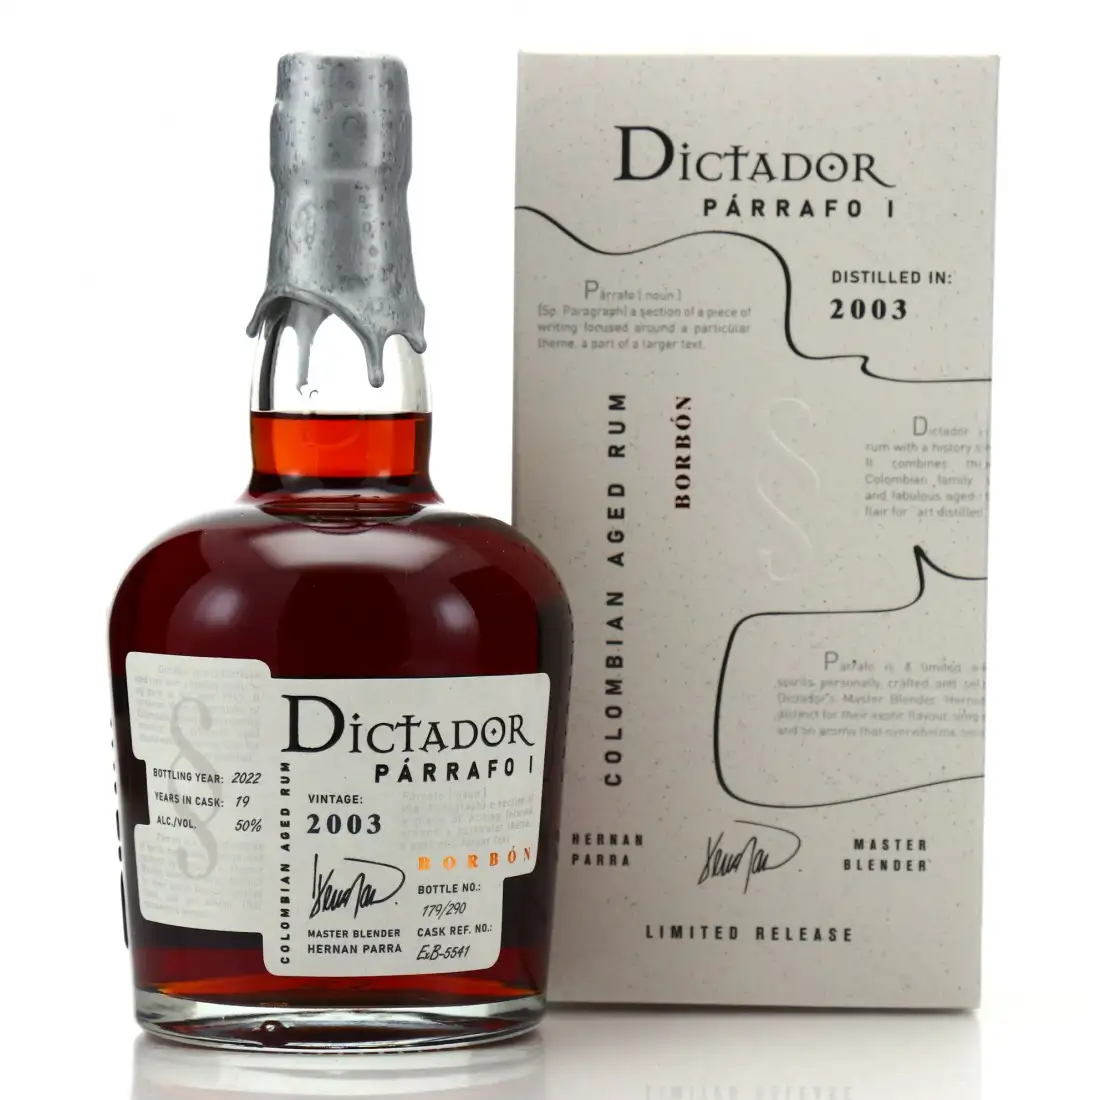 Image of the front of the bottle of the rum Dictador Párrafo I Borbón